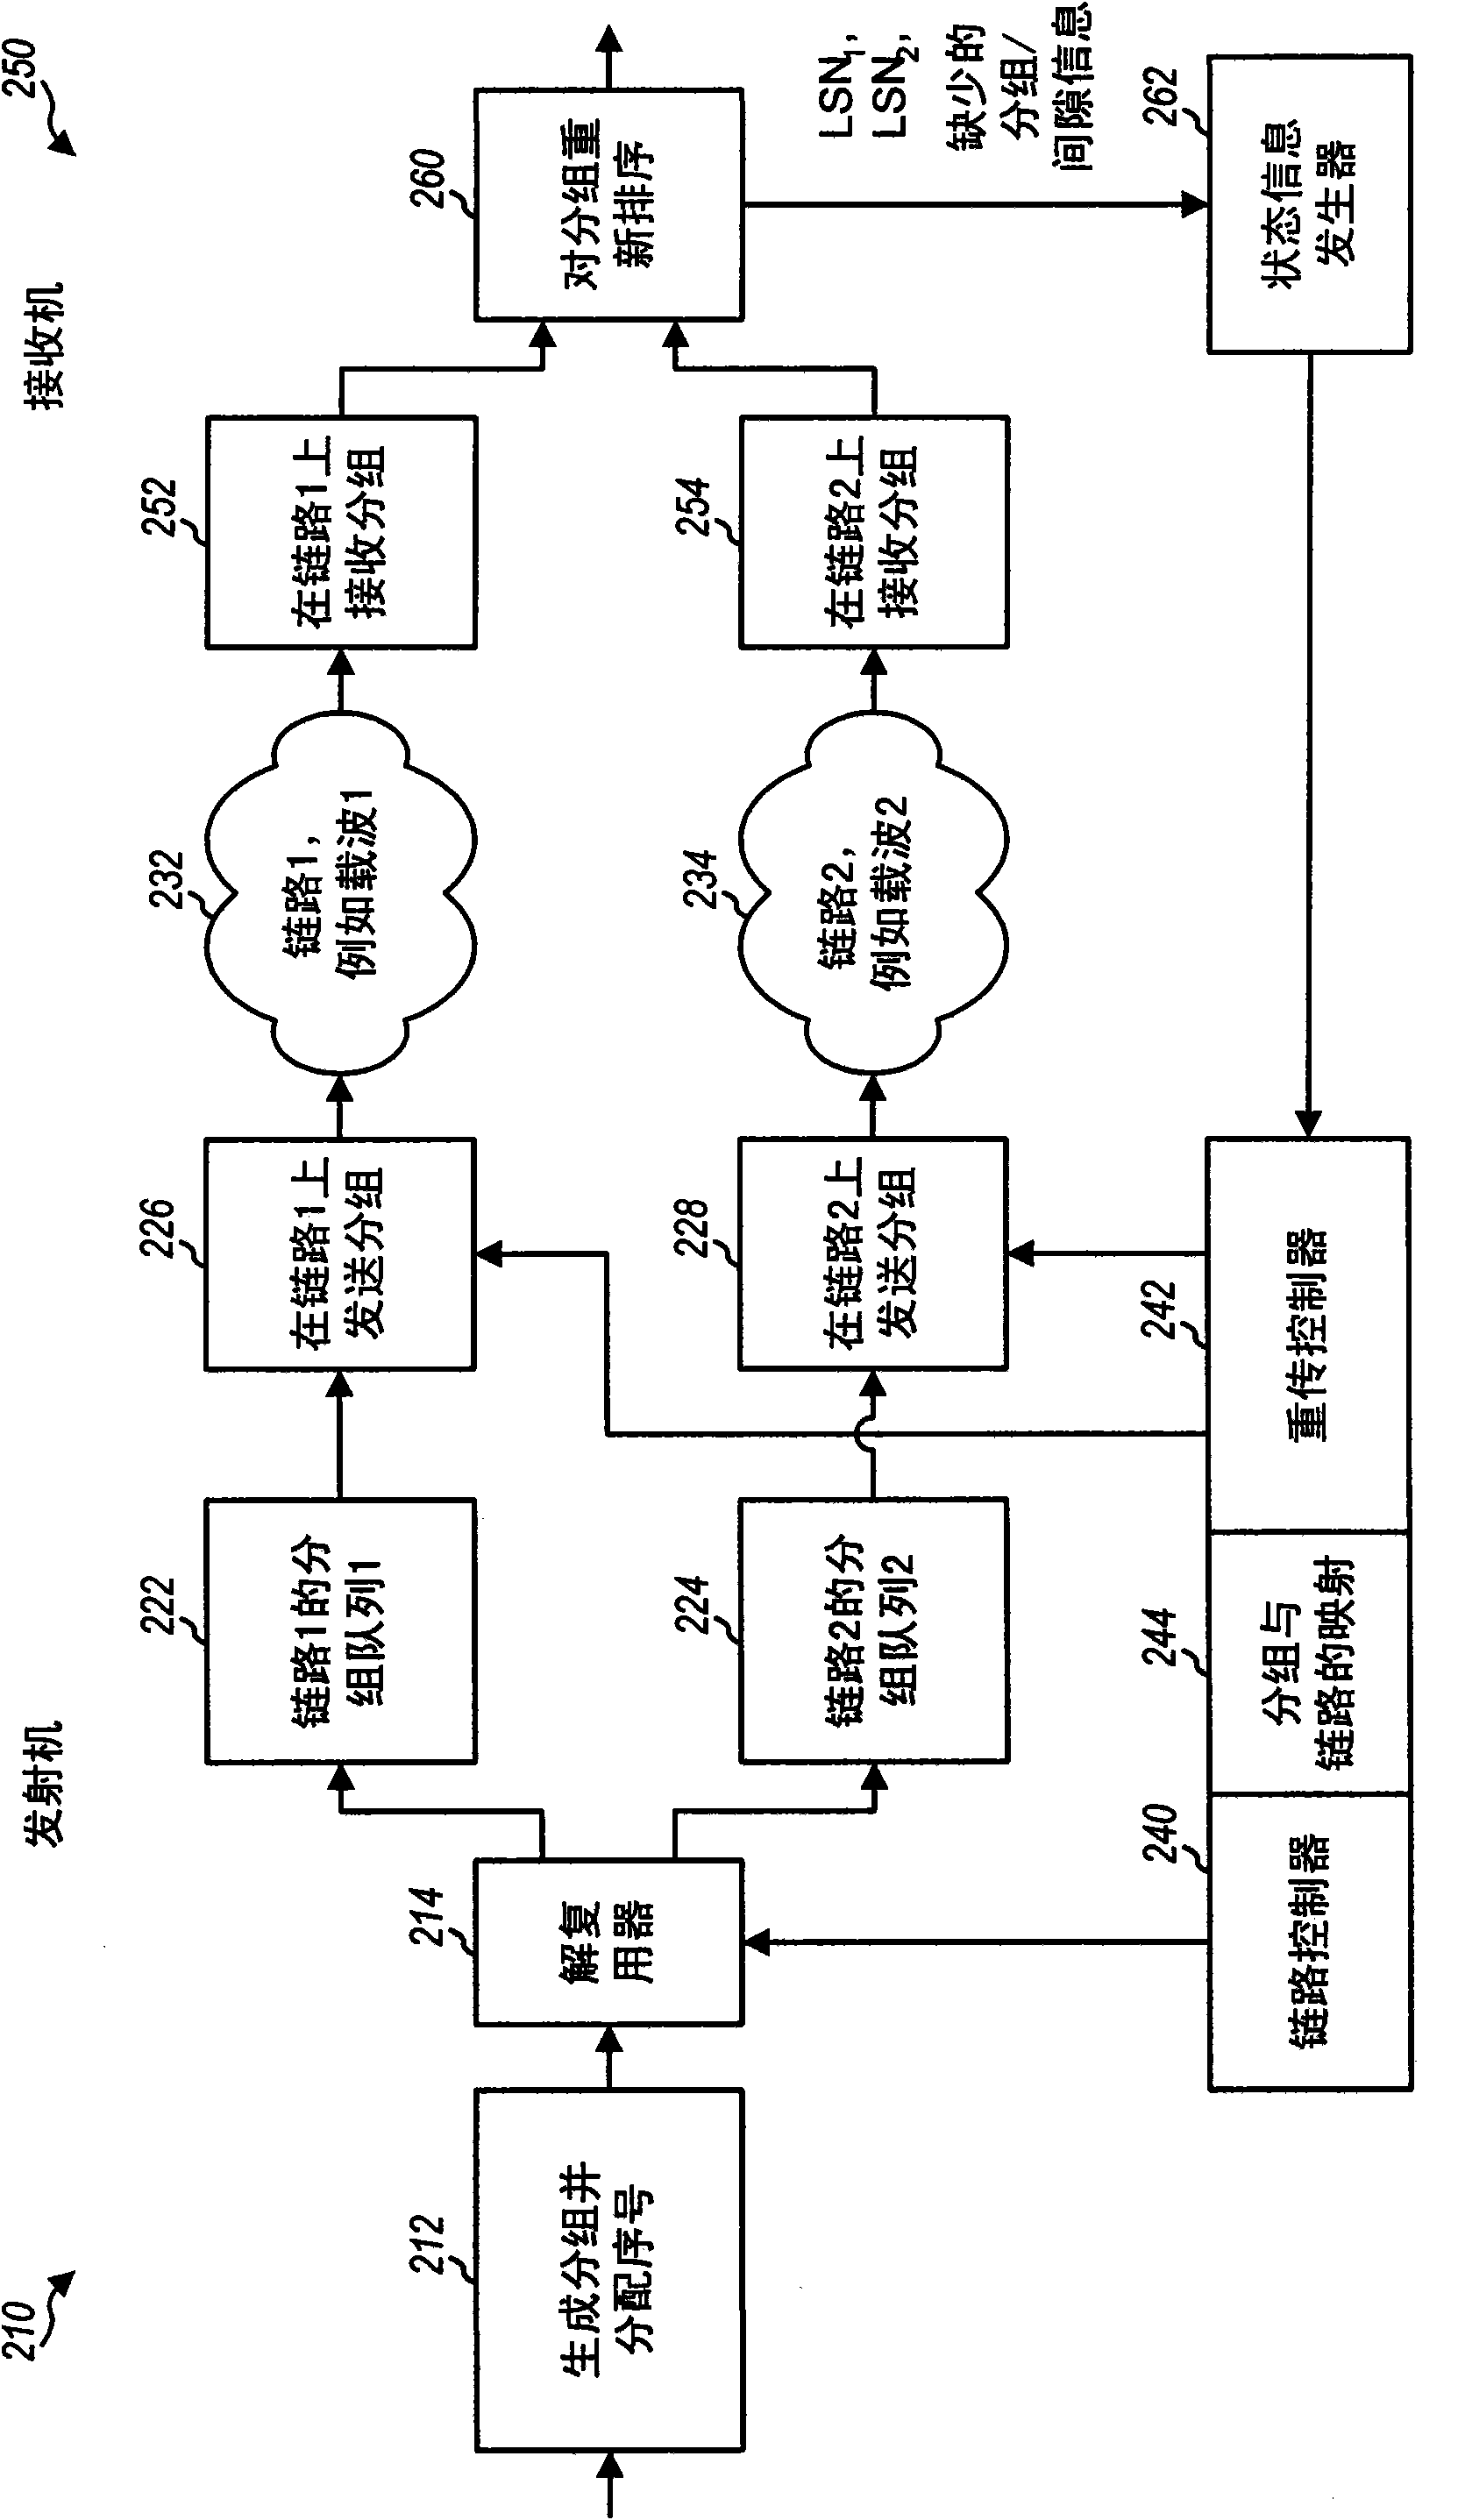 Method and apparatus for link control in a wireless communication system